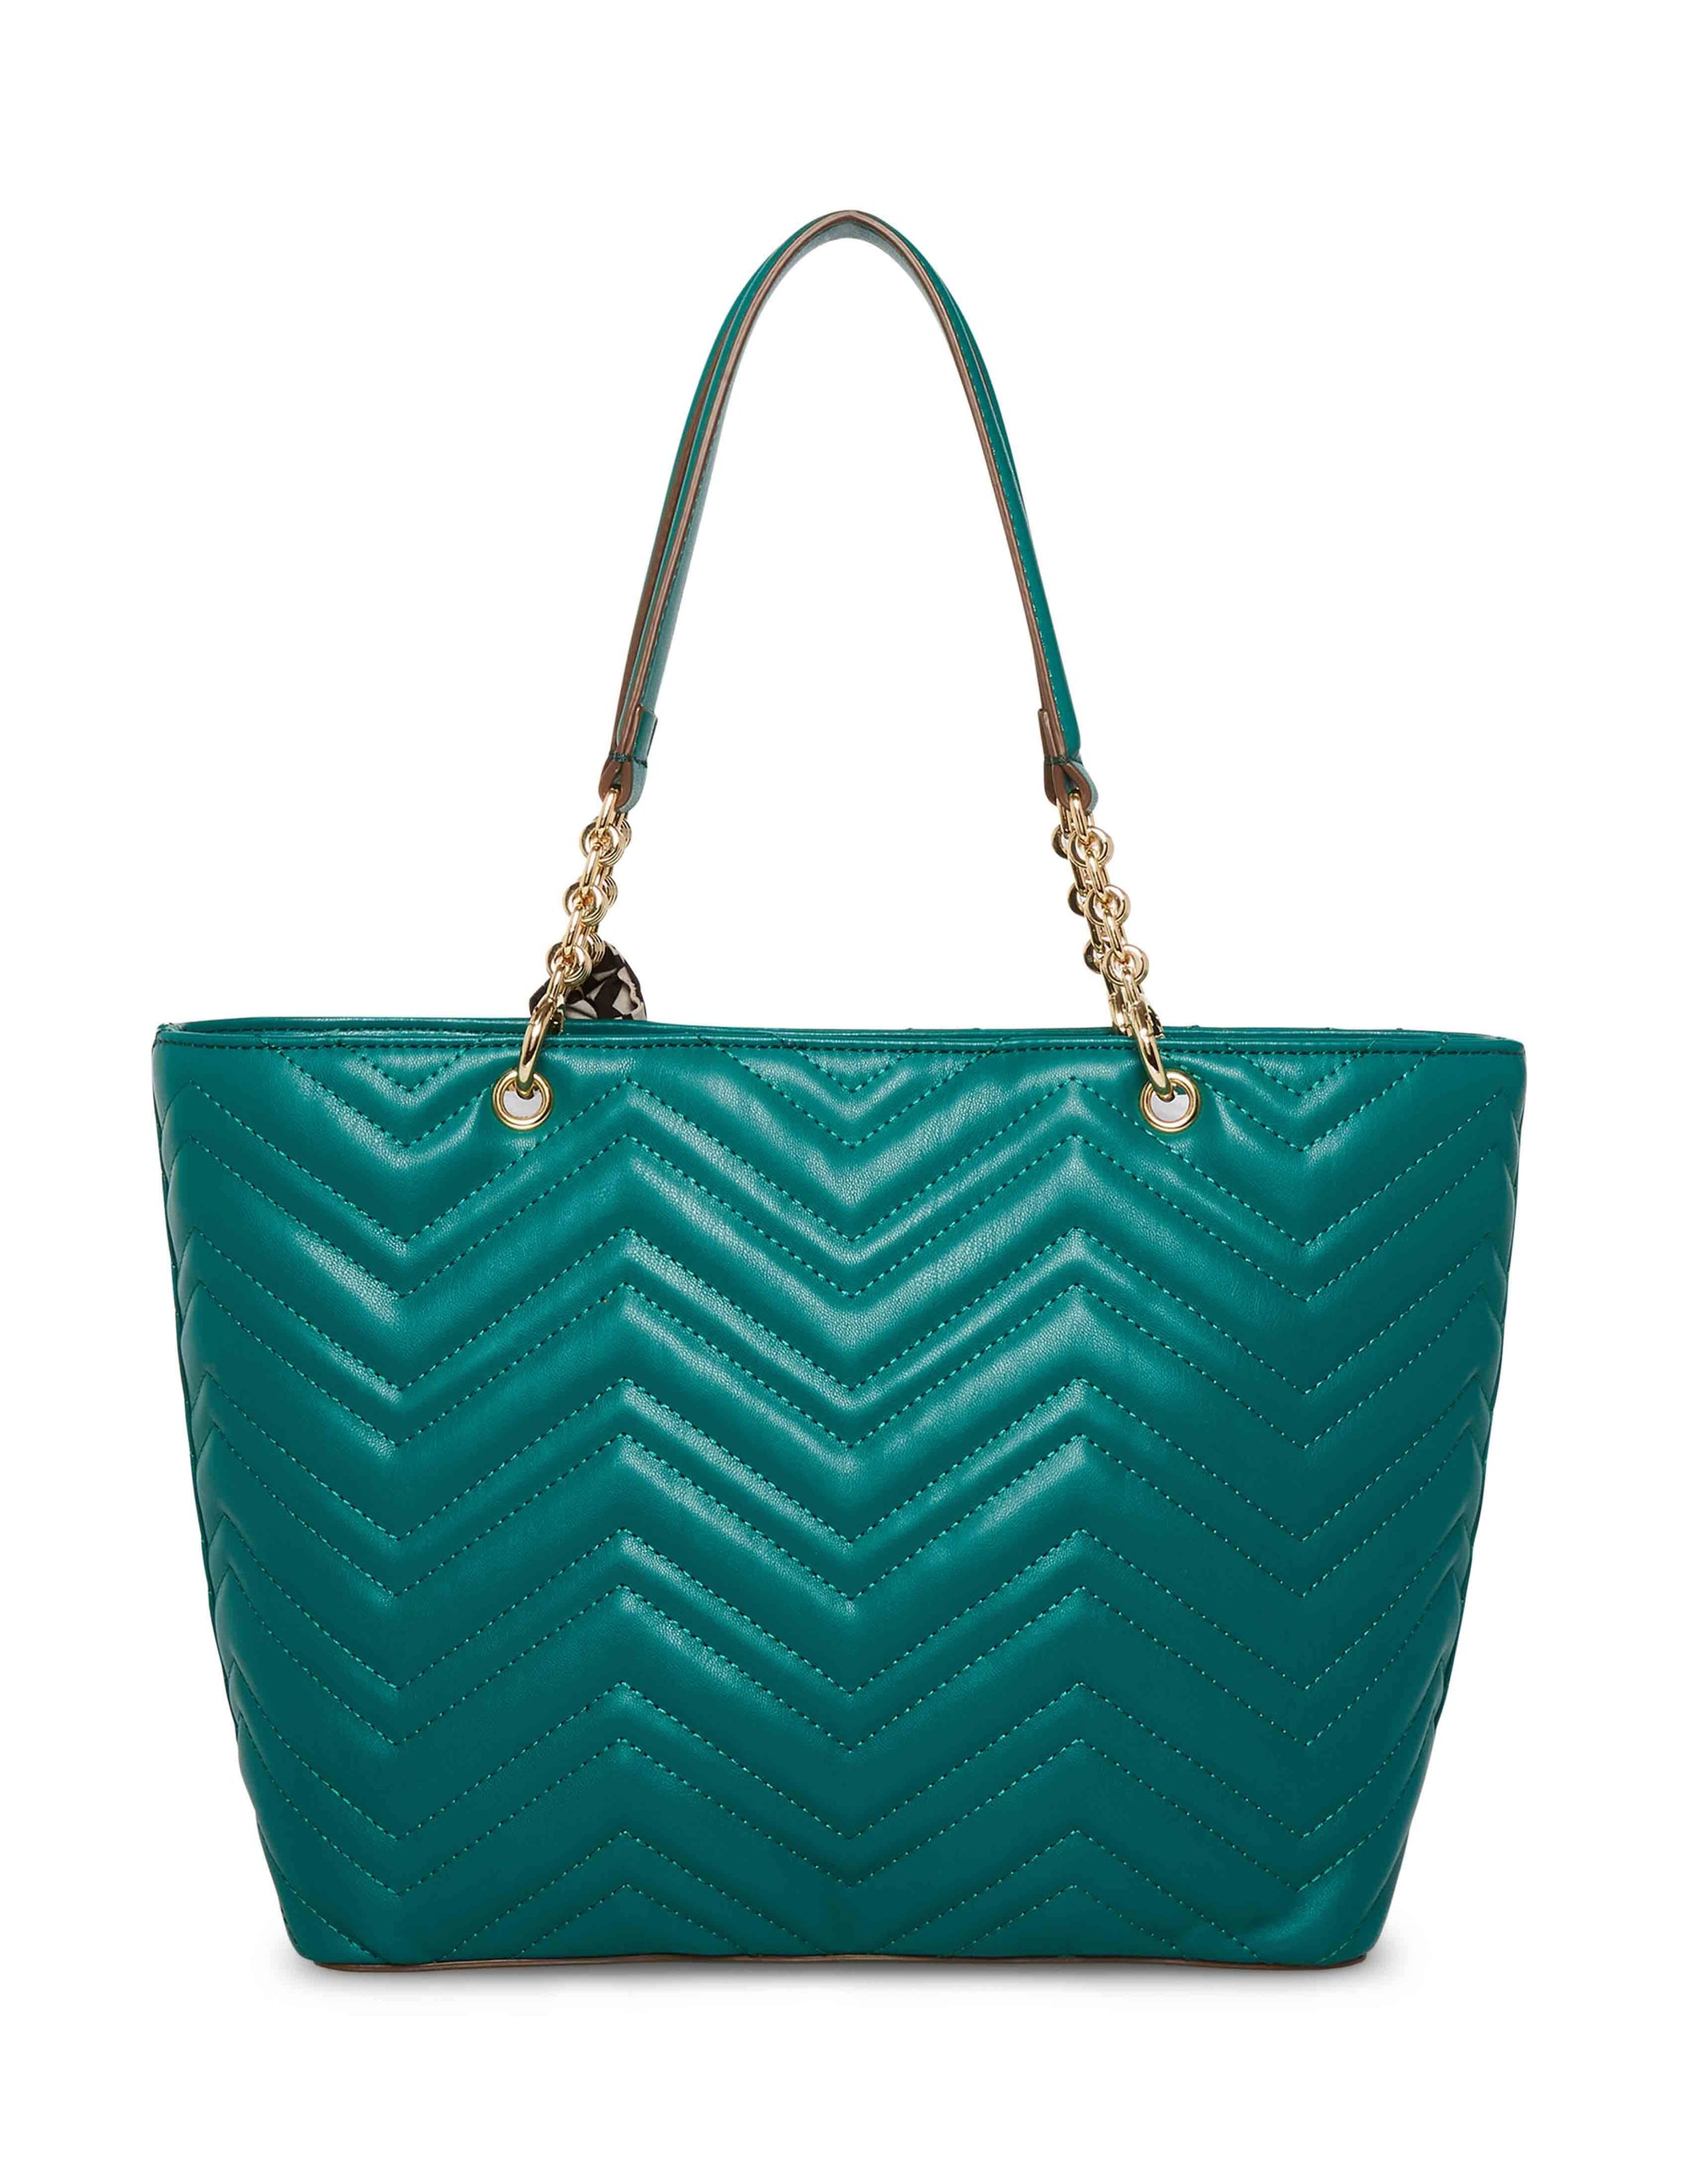 Anne Klein Emerald Quilted Chain Tote With Turn Lock